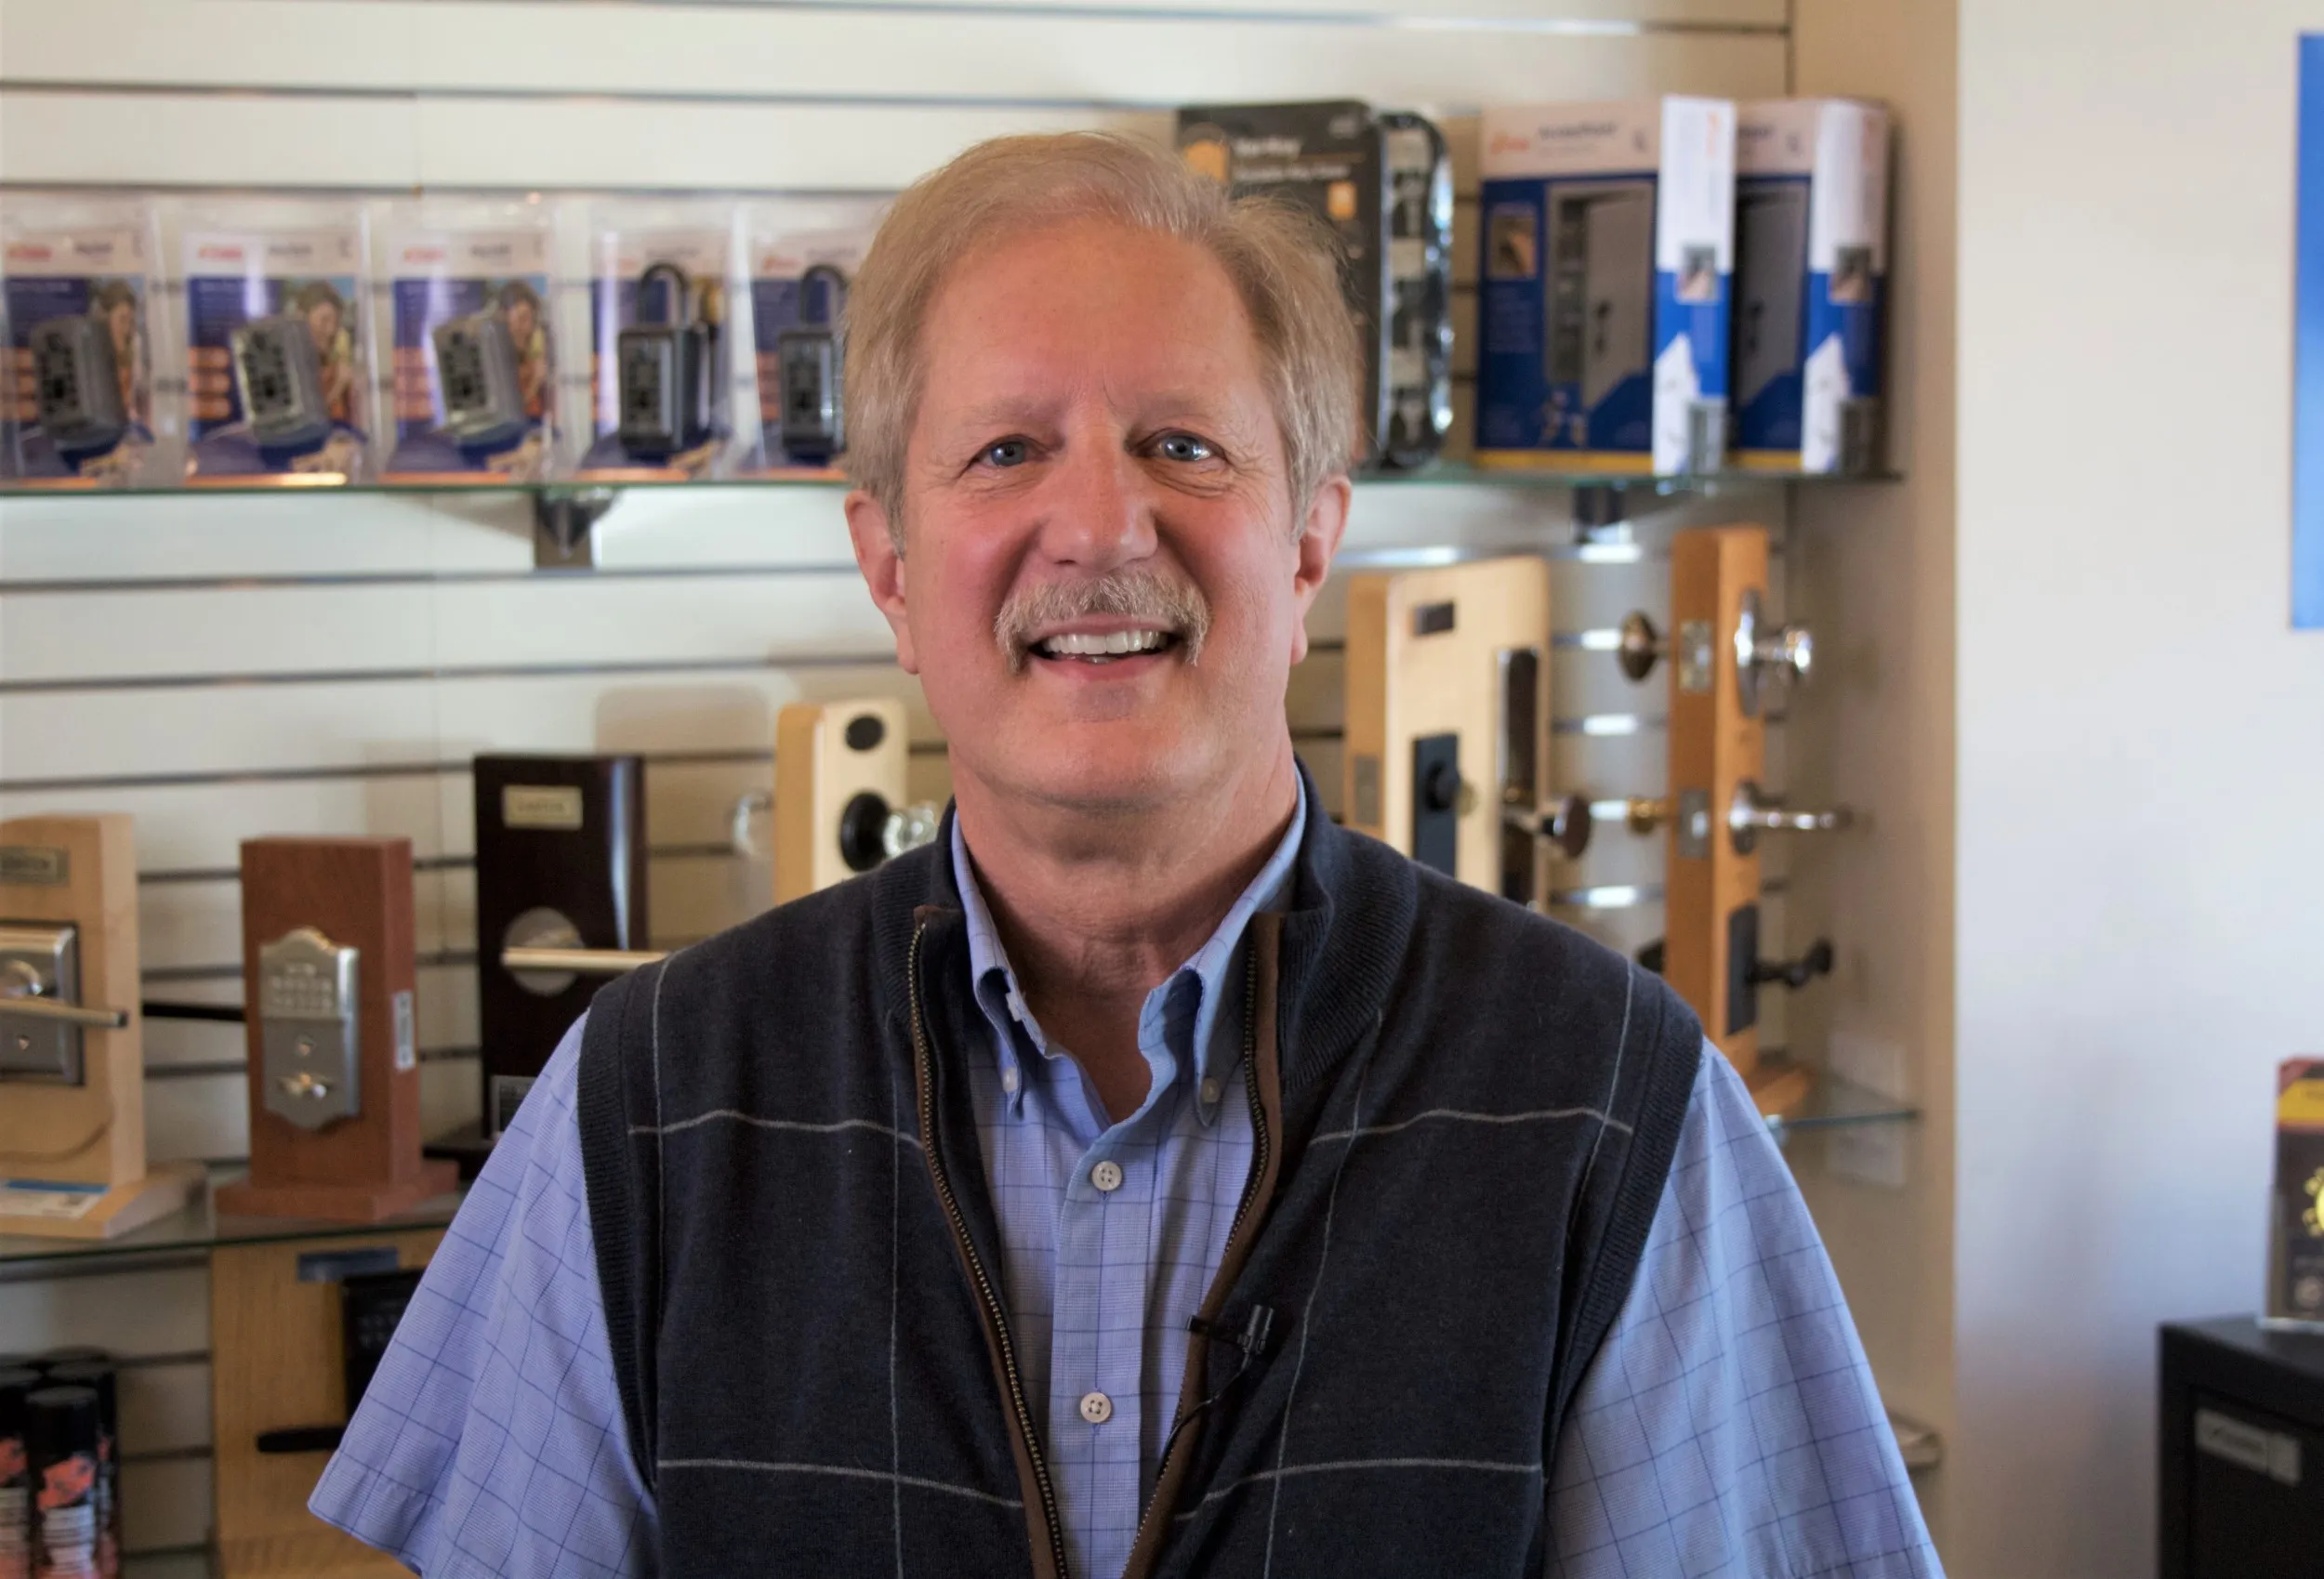 Gary Lekan is a 42-year veteran of the locksmith industry and owner of First Lock &amp; Security Technologies, a Diamond Certified company since 2011. He can be reached at (650) 204-4376 or by email.